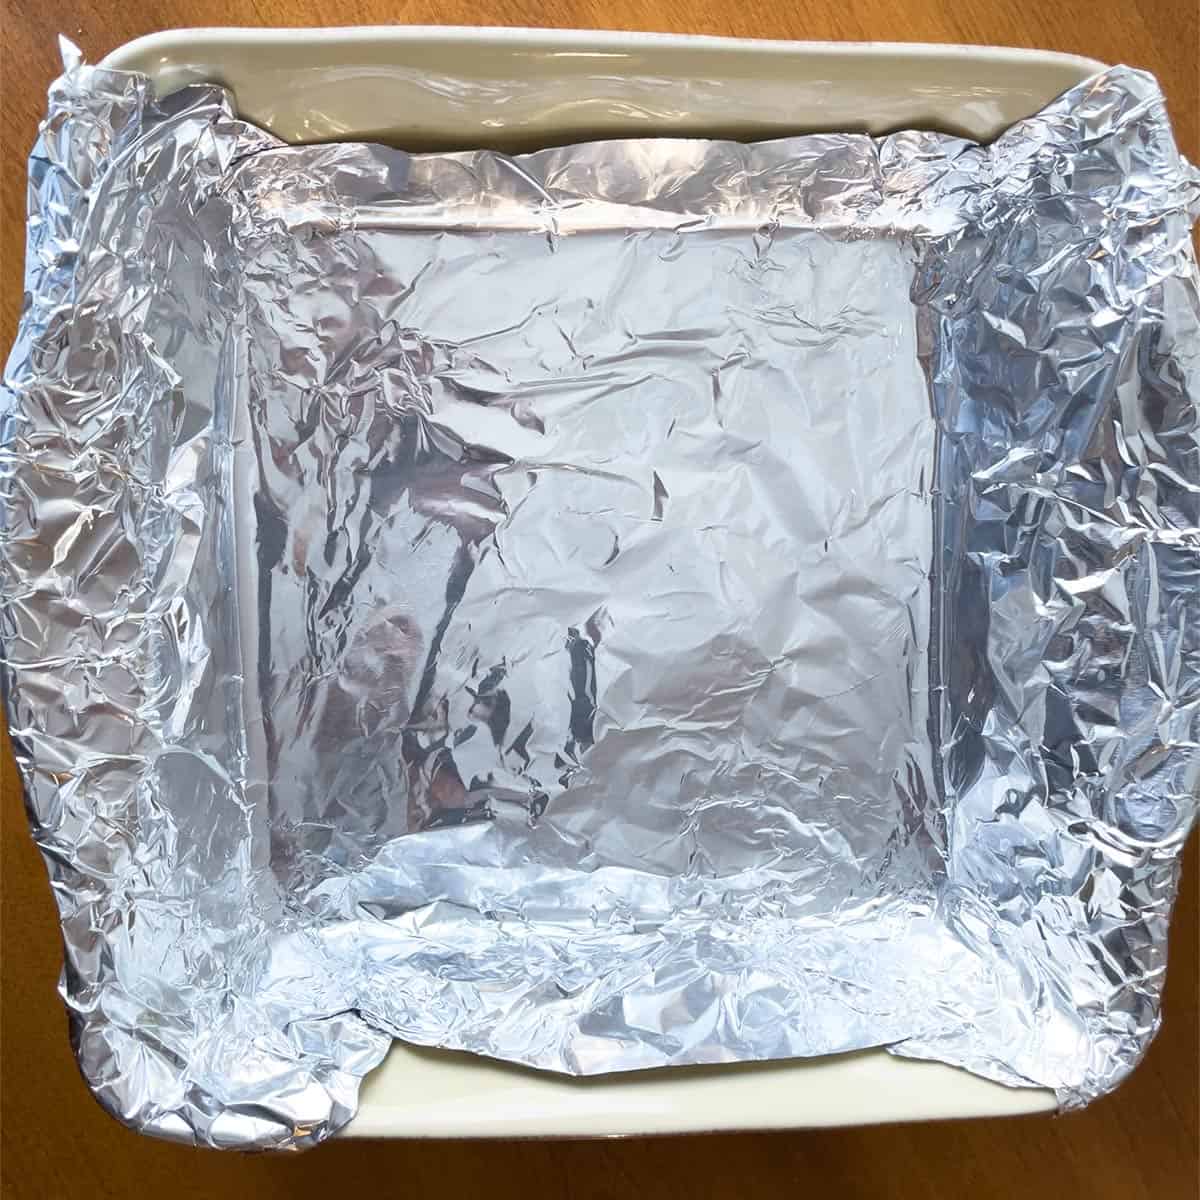 How to line a baking dish with tinfoil for cheesecake.